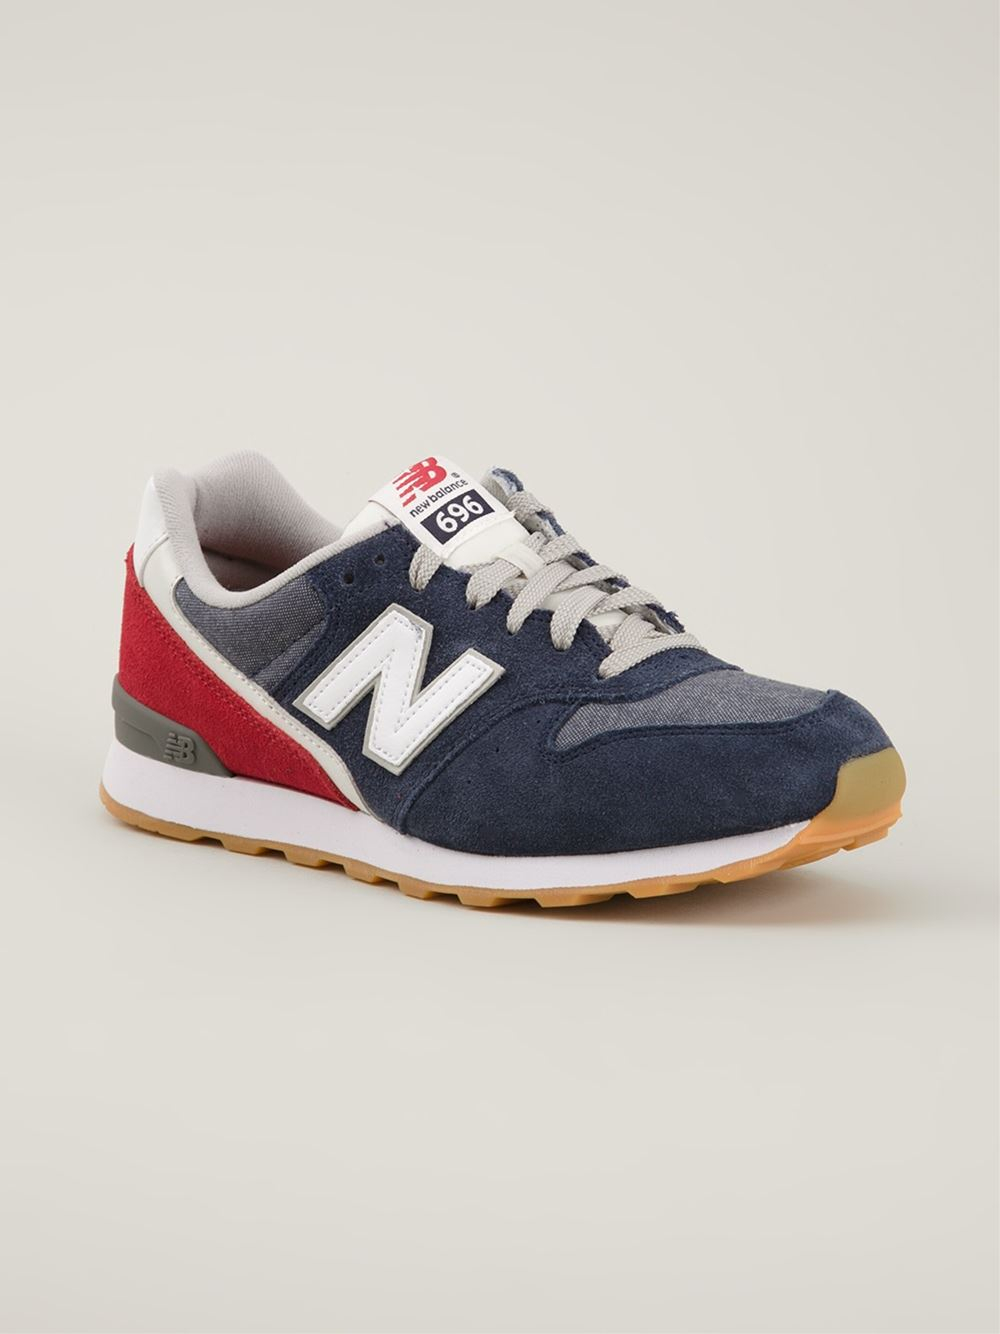 Lyst - New Balance 'Rev Lite' Trainers in Blue